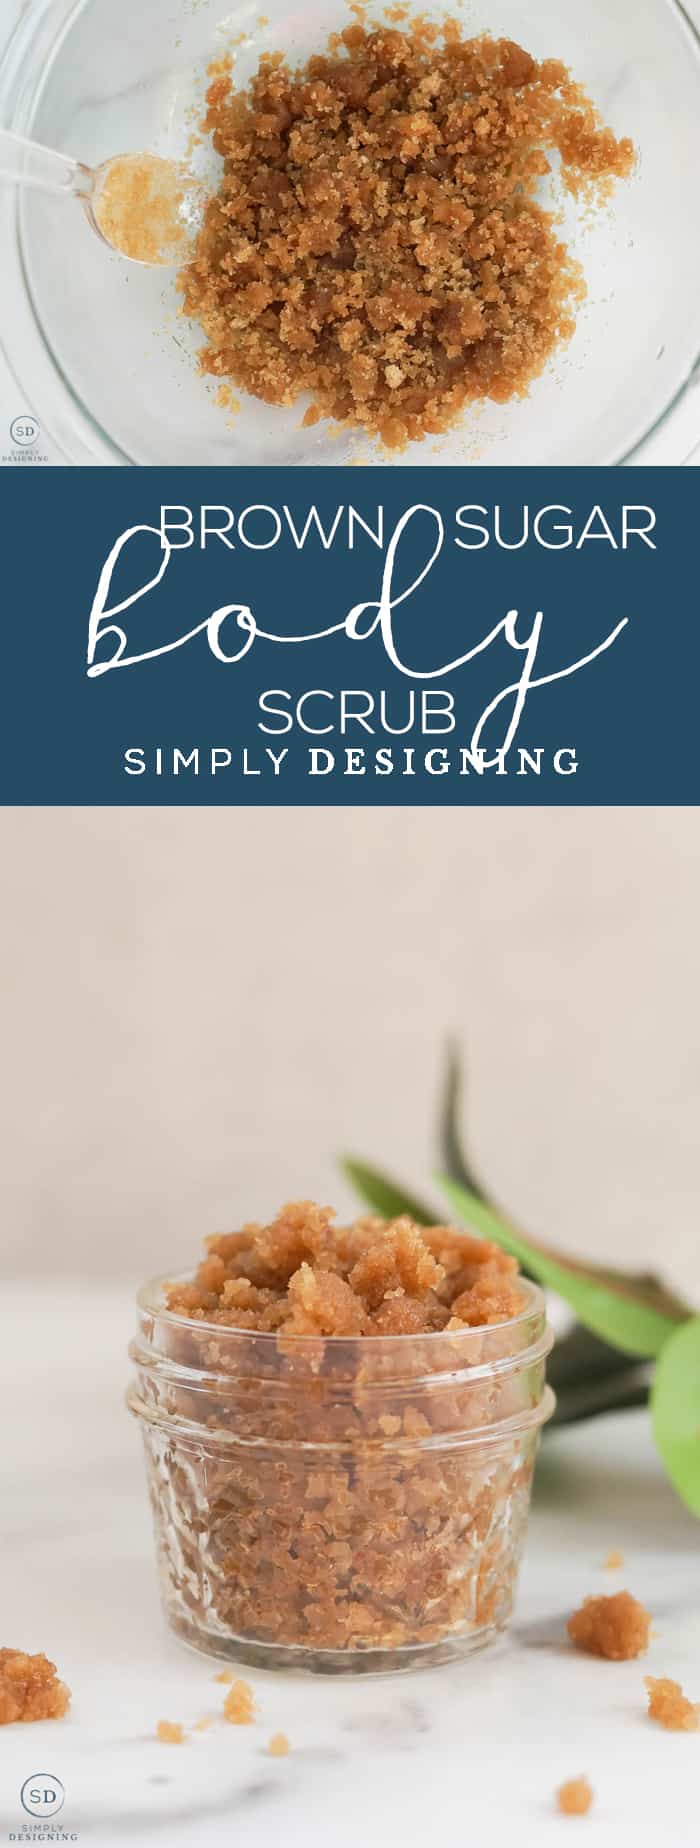 This homemade Brown Sugar Scrub is an easy way to exfoliate your whole body at home while saving money